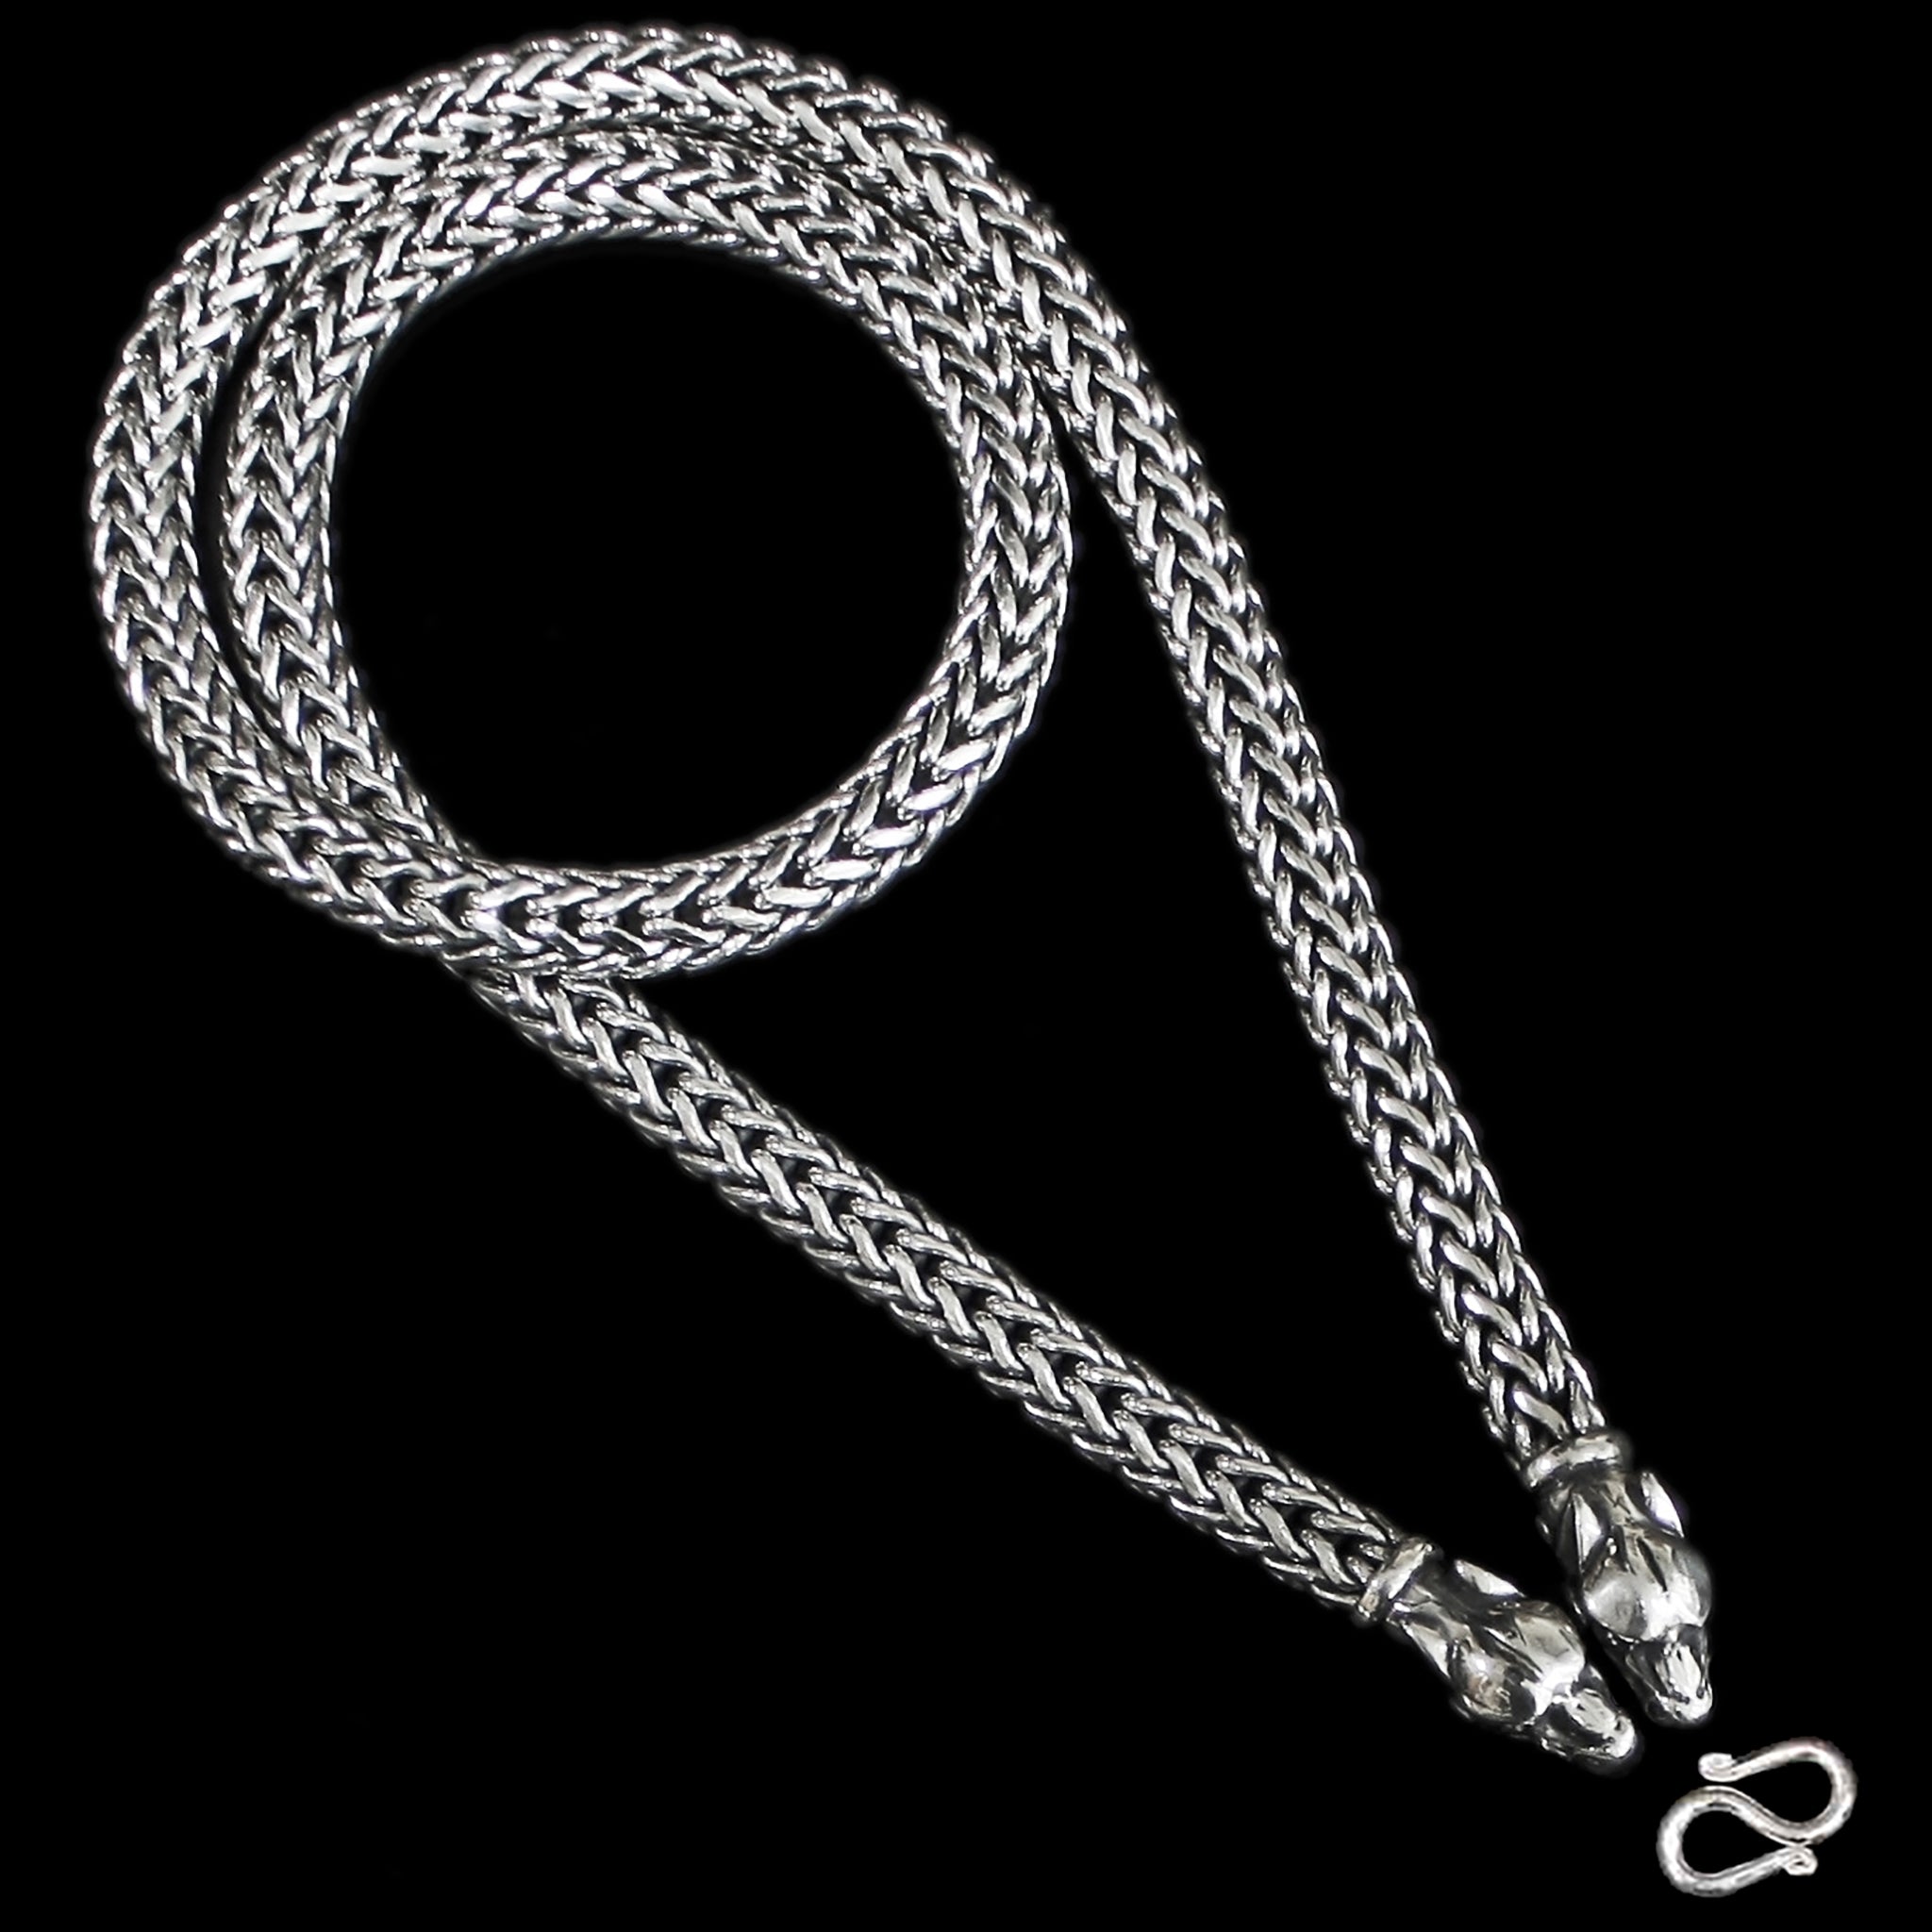 8mm Thick Silver Snake Chain Thors Hammer Necklace - Ferocious Wolf Heads - S-Clasp